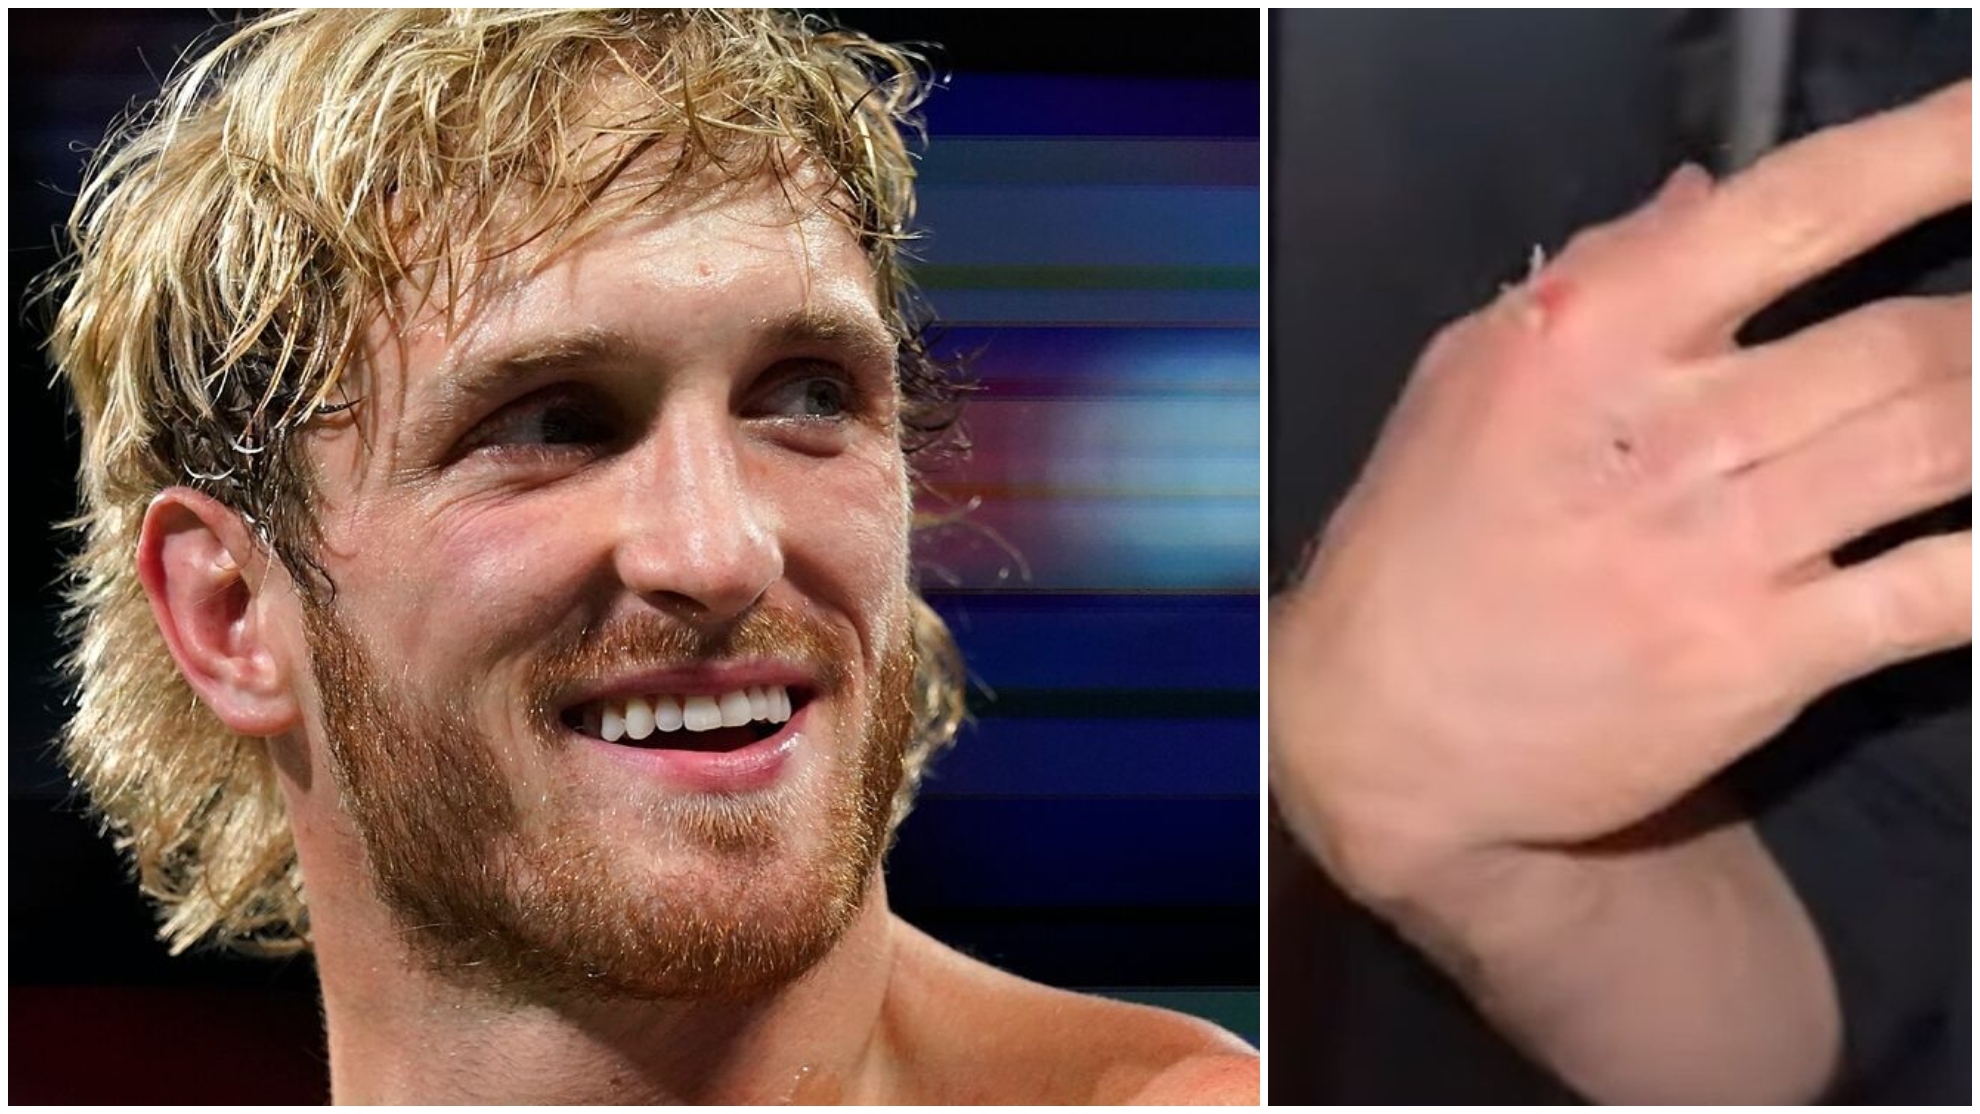 Logan Paul shares footage of the punch that broke his hand